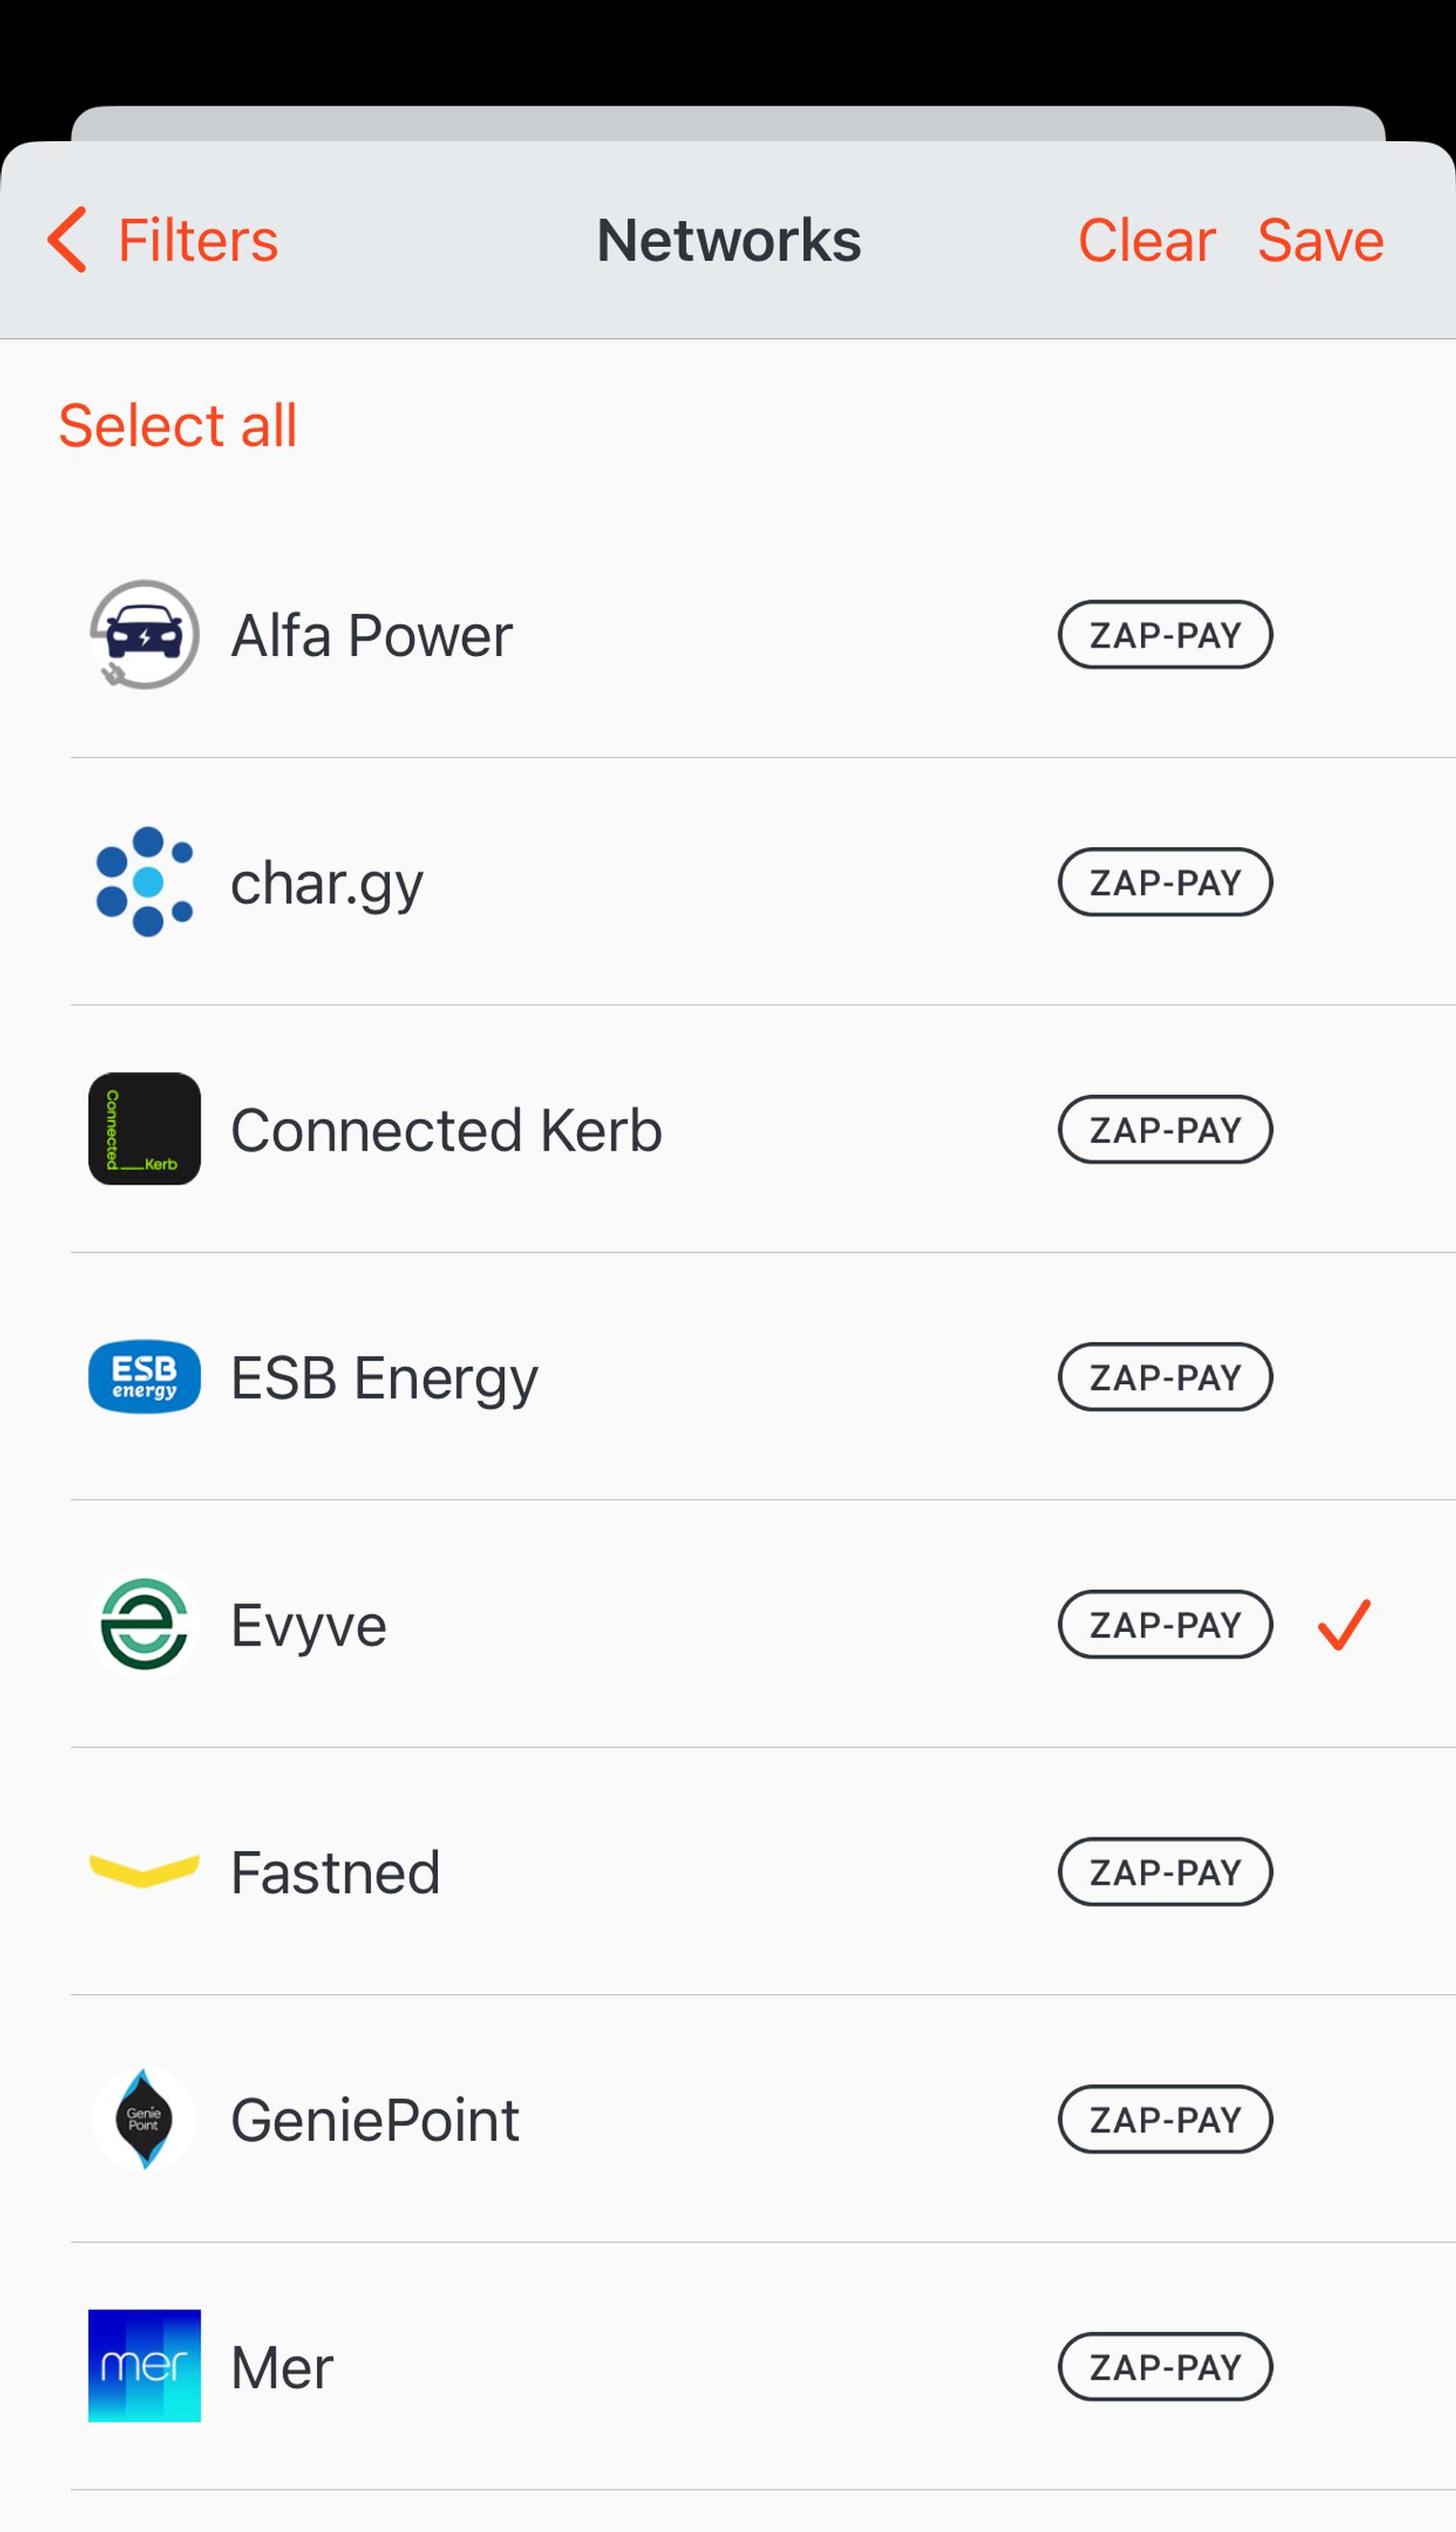 Zap-Pay now covers 10 networks